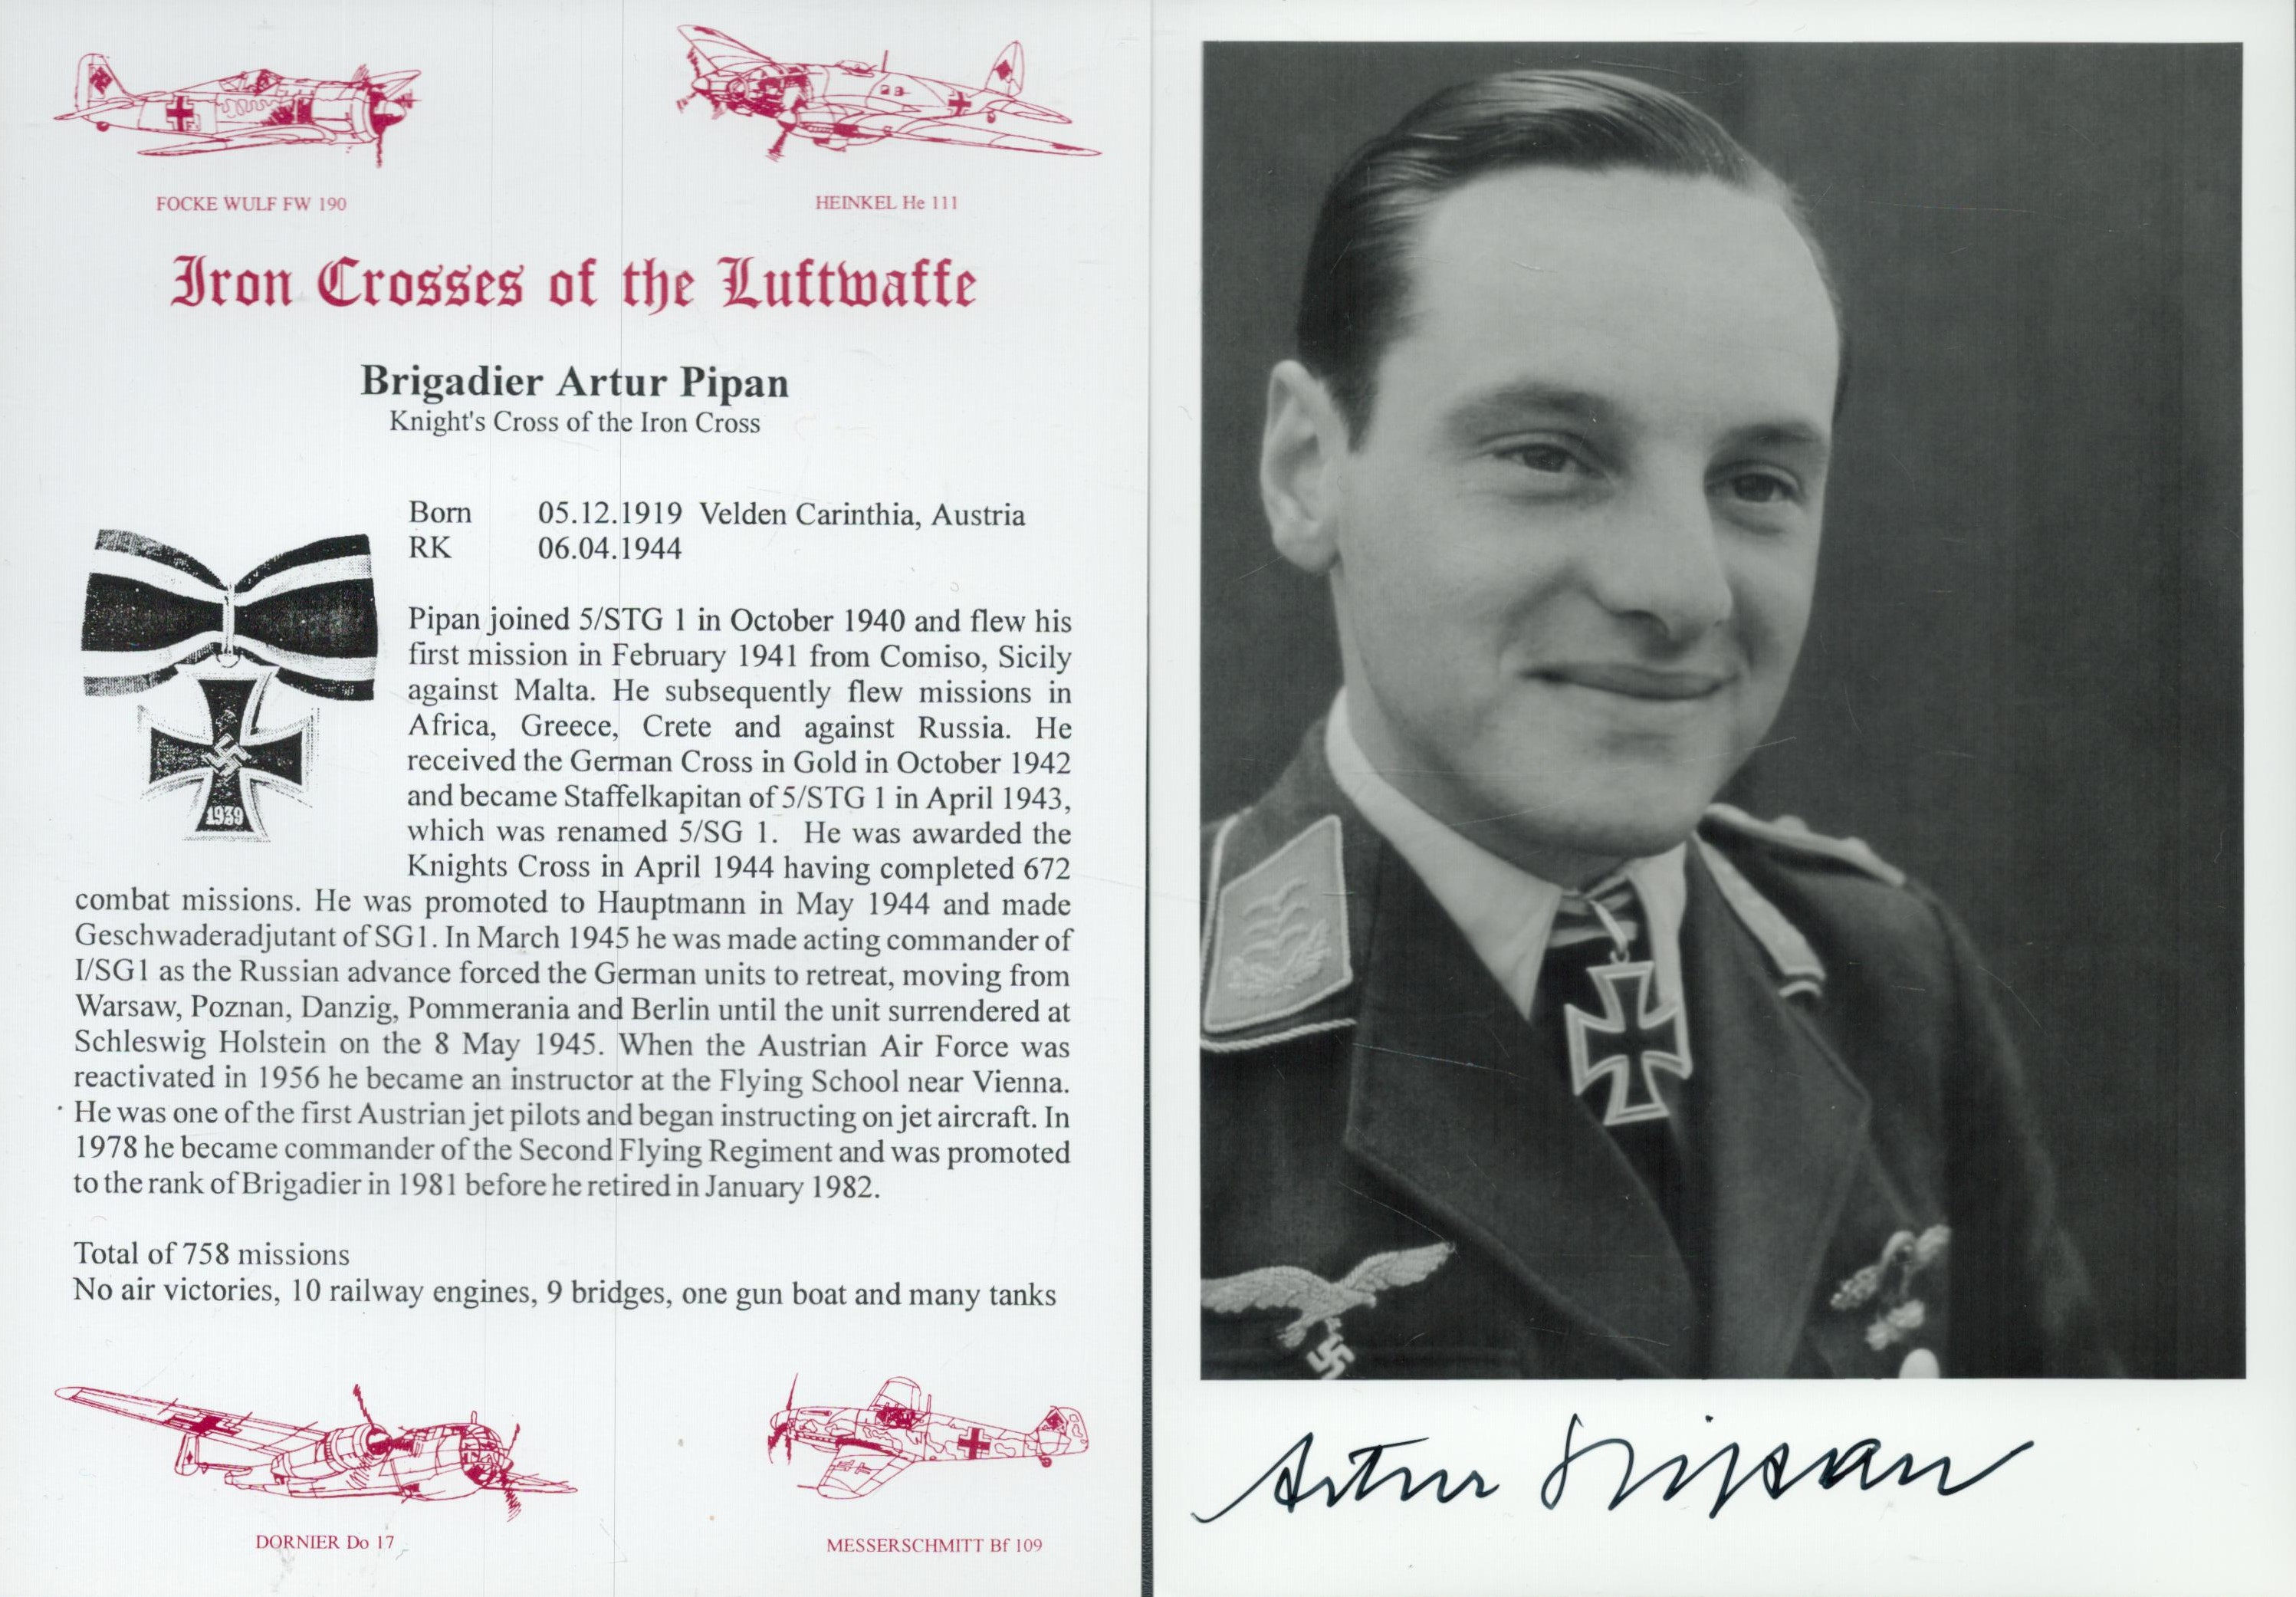 WW2 Luftwaffe fighter ace Brig Artur Pipan KC signed 7 x 5 inch b/w portrait photo along with a